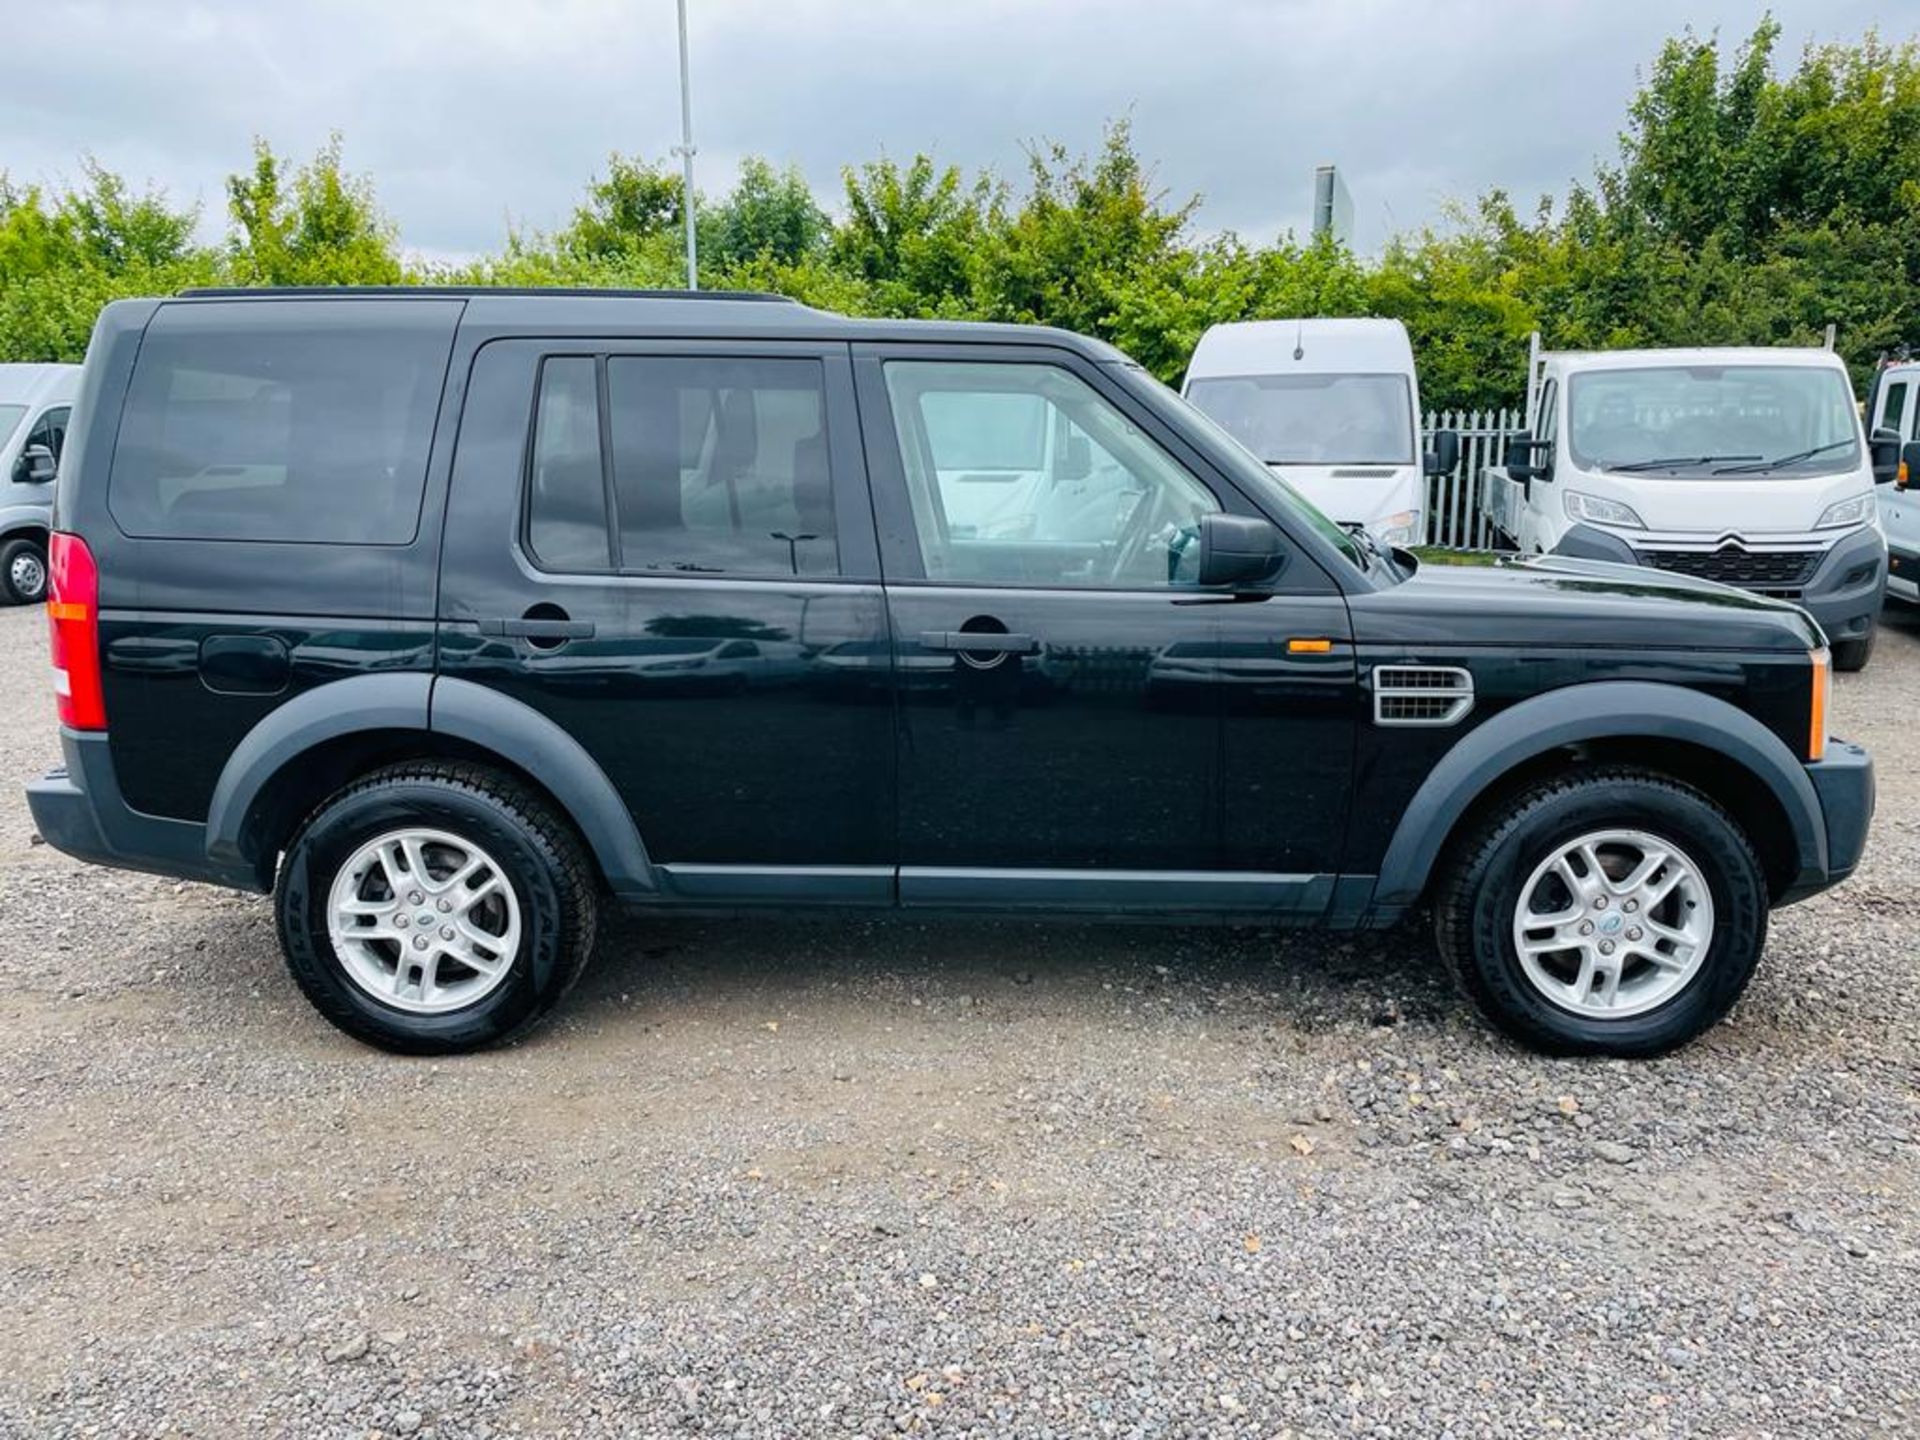 ** ON SALE ** Land Rover Discovery 3 2.7 TDV6 XS Commercial 2008 '57 Reg' A/C - All Terrain Settings - Image 10 of 29